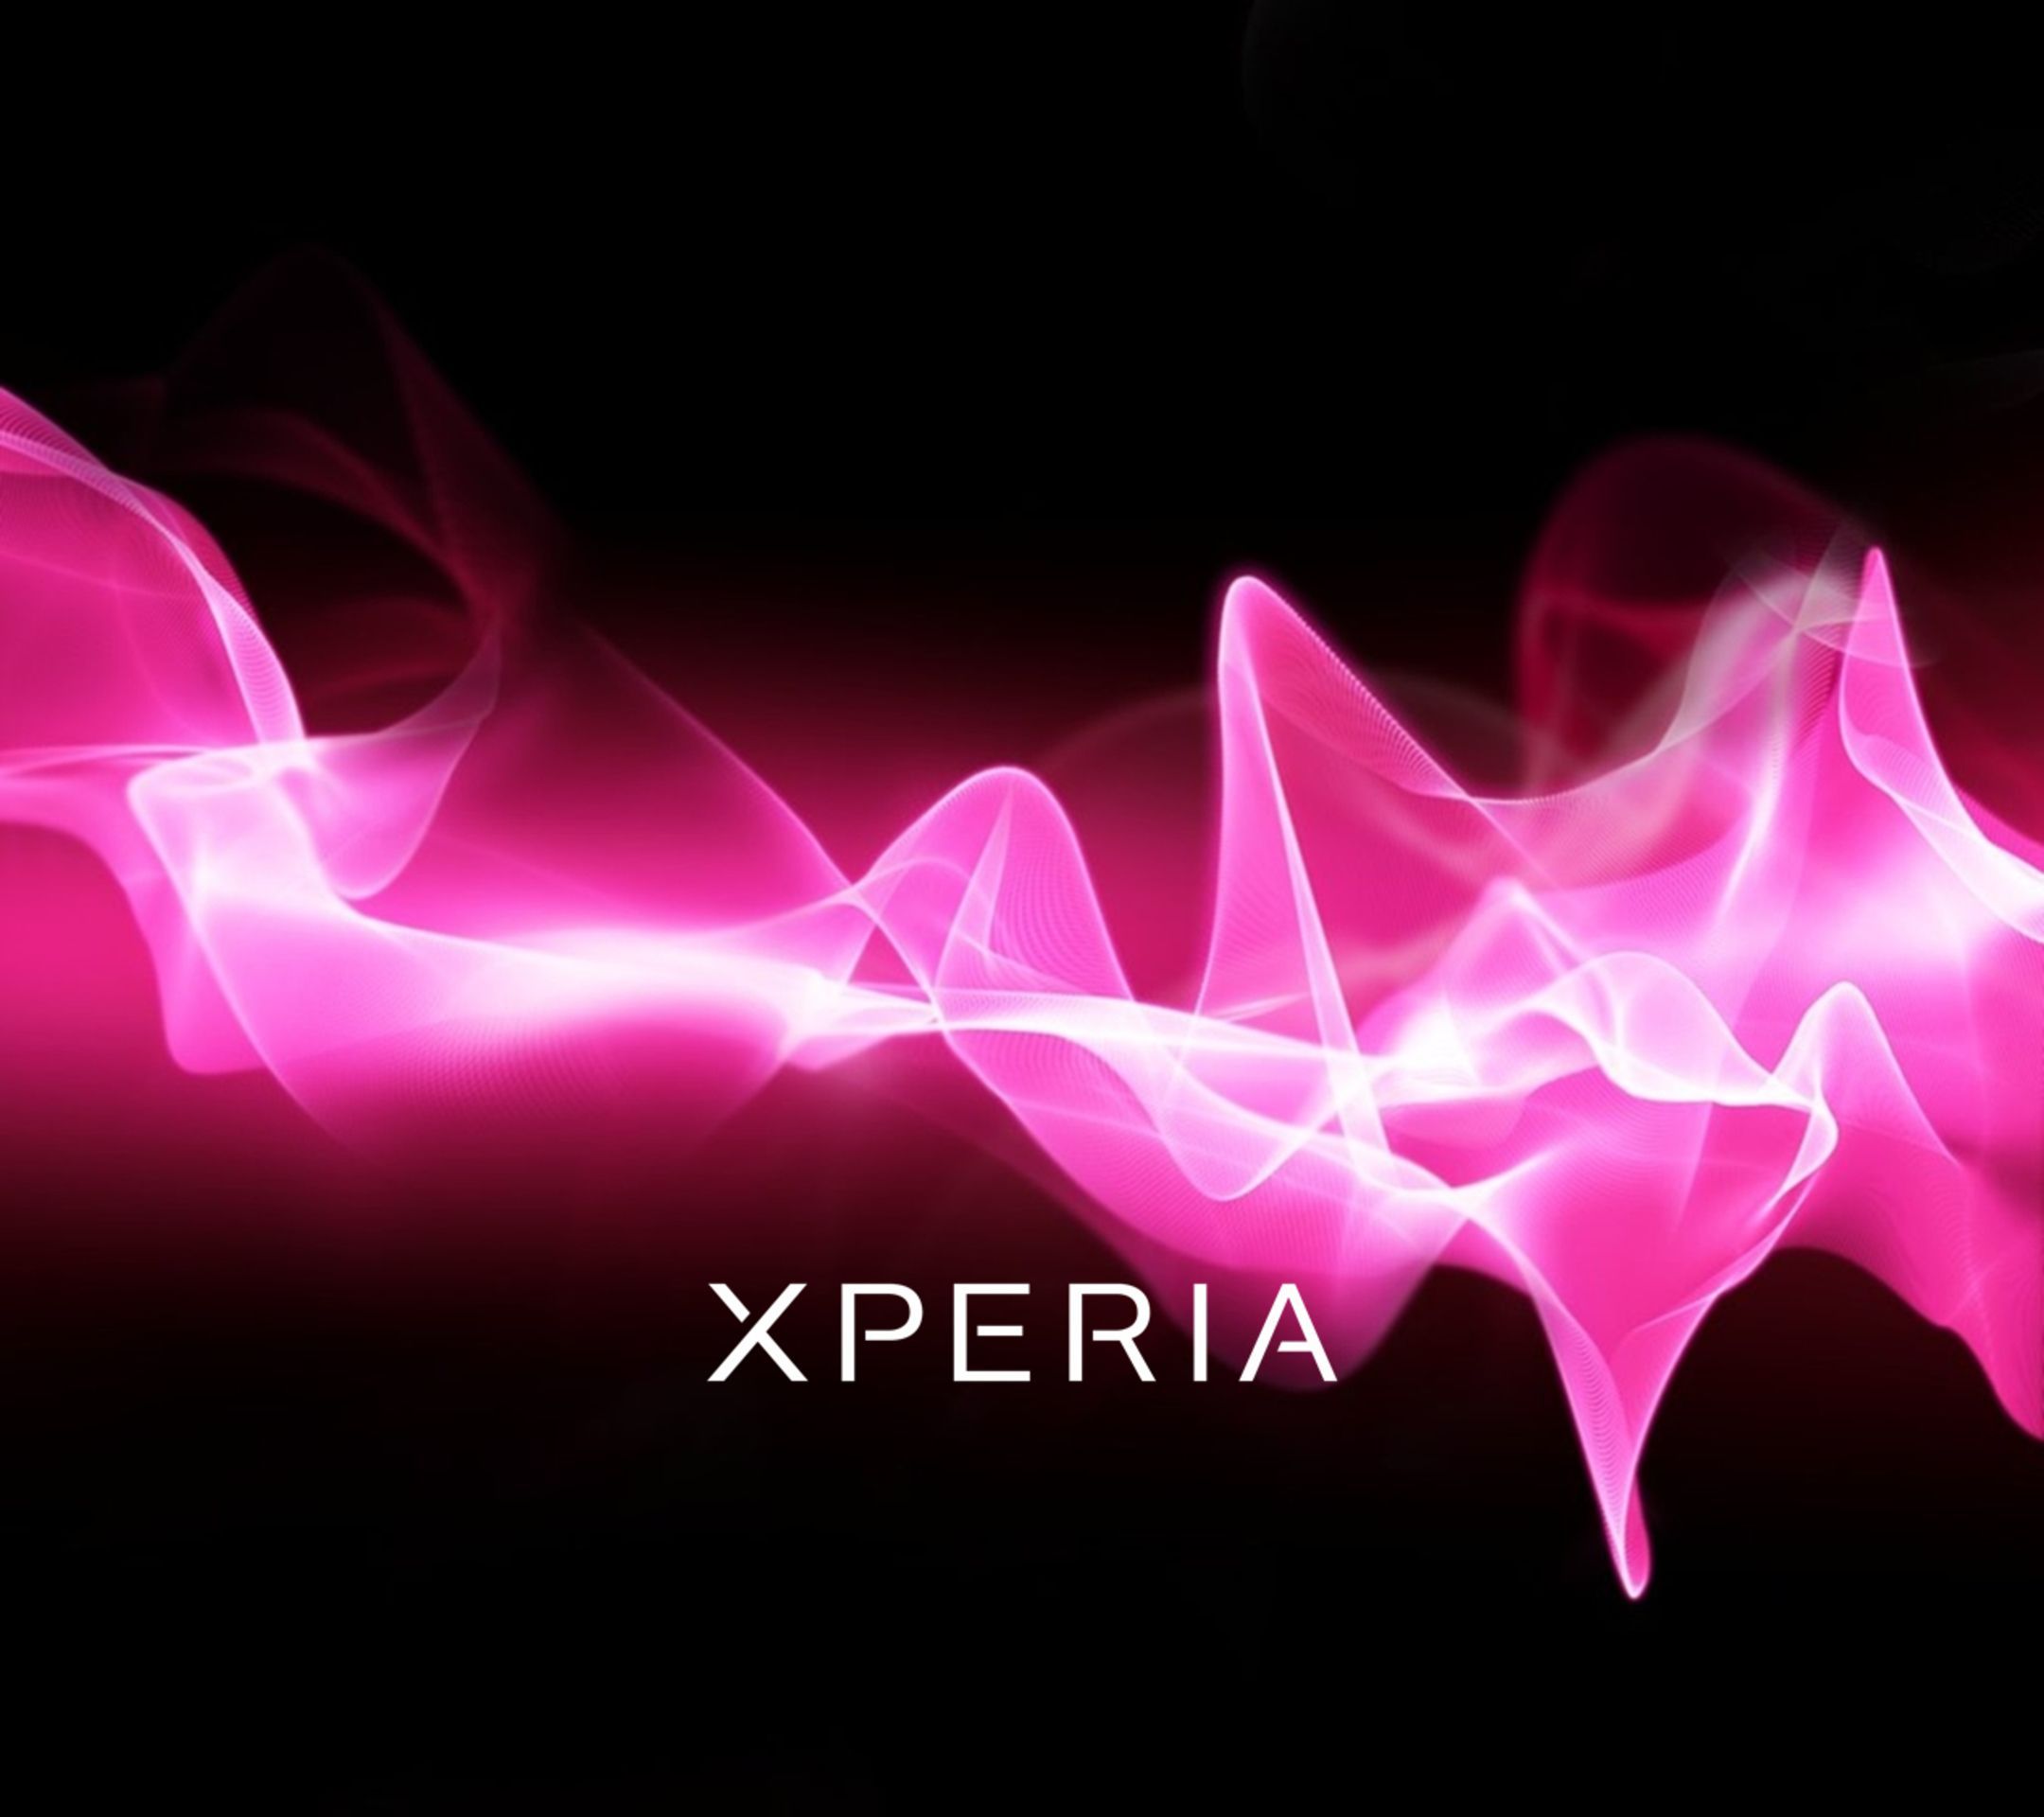 Xperia Z Wallpapers HD - Beautiful, stunning wallpapers